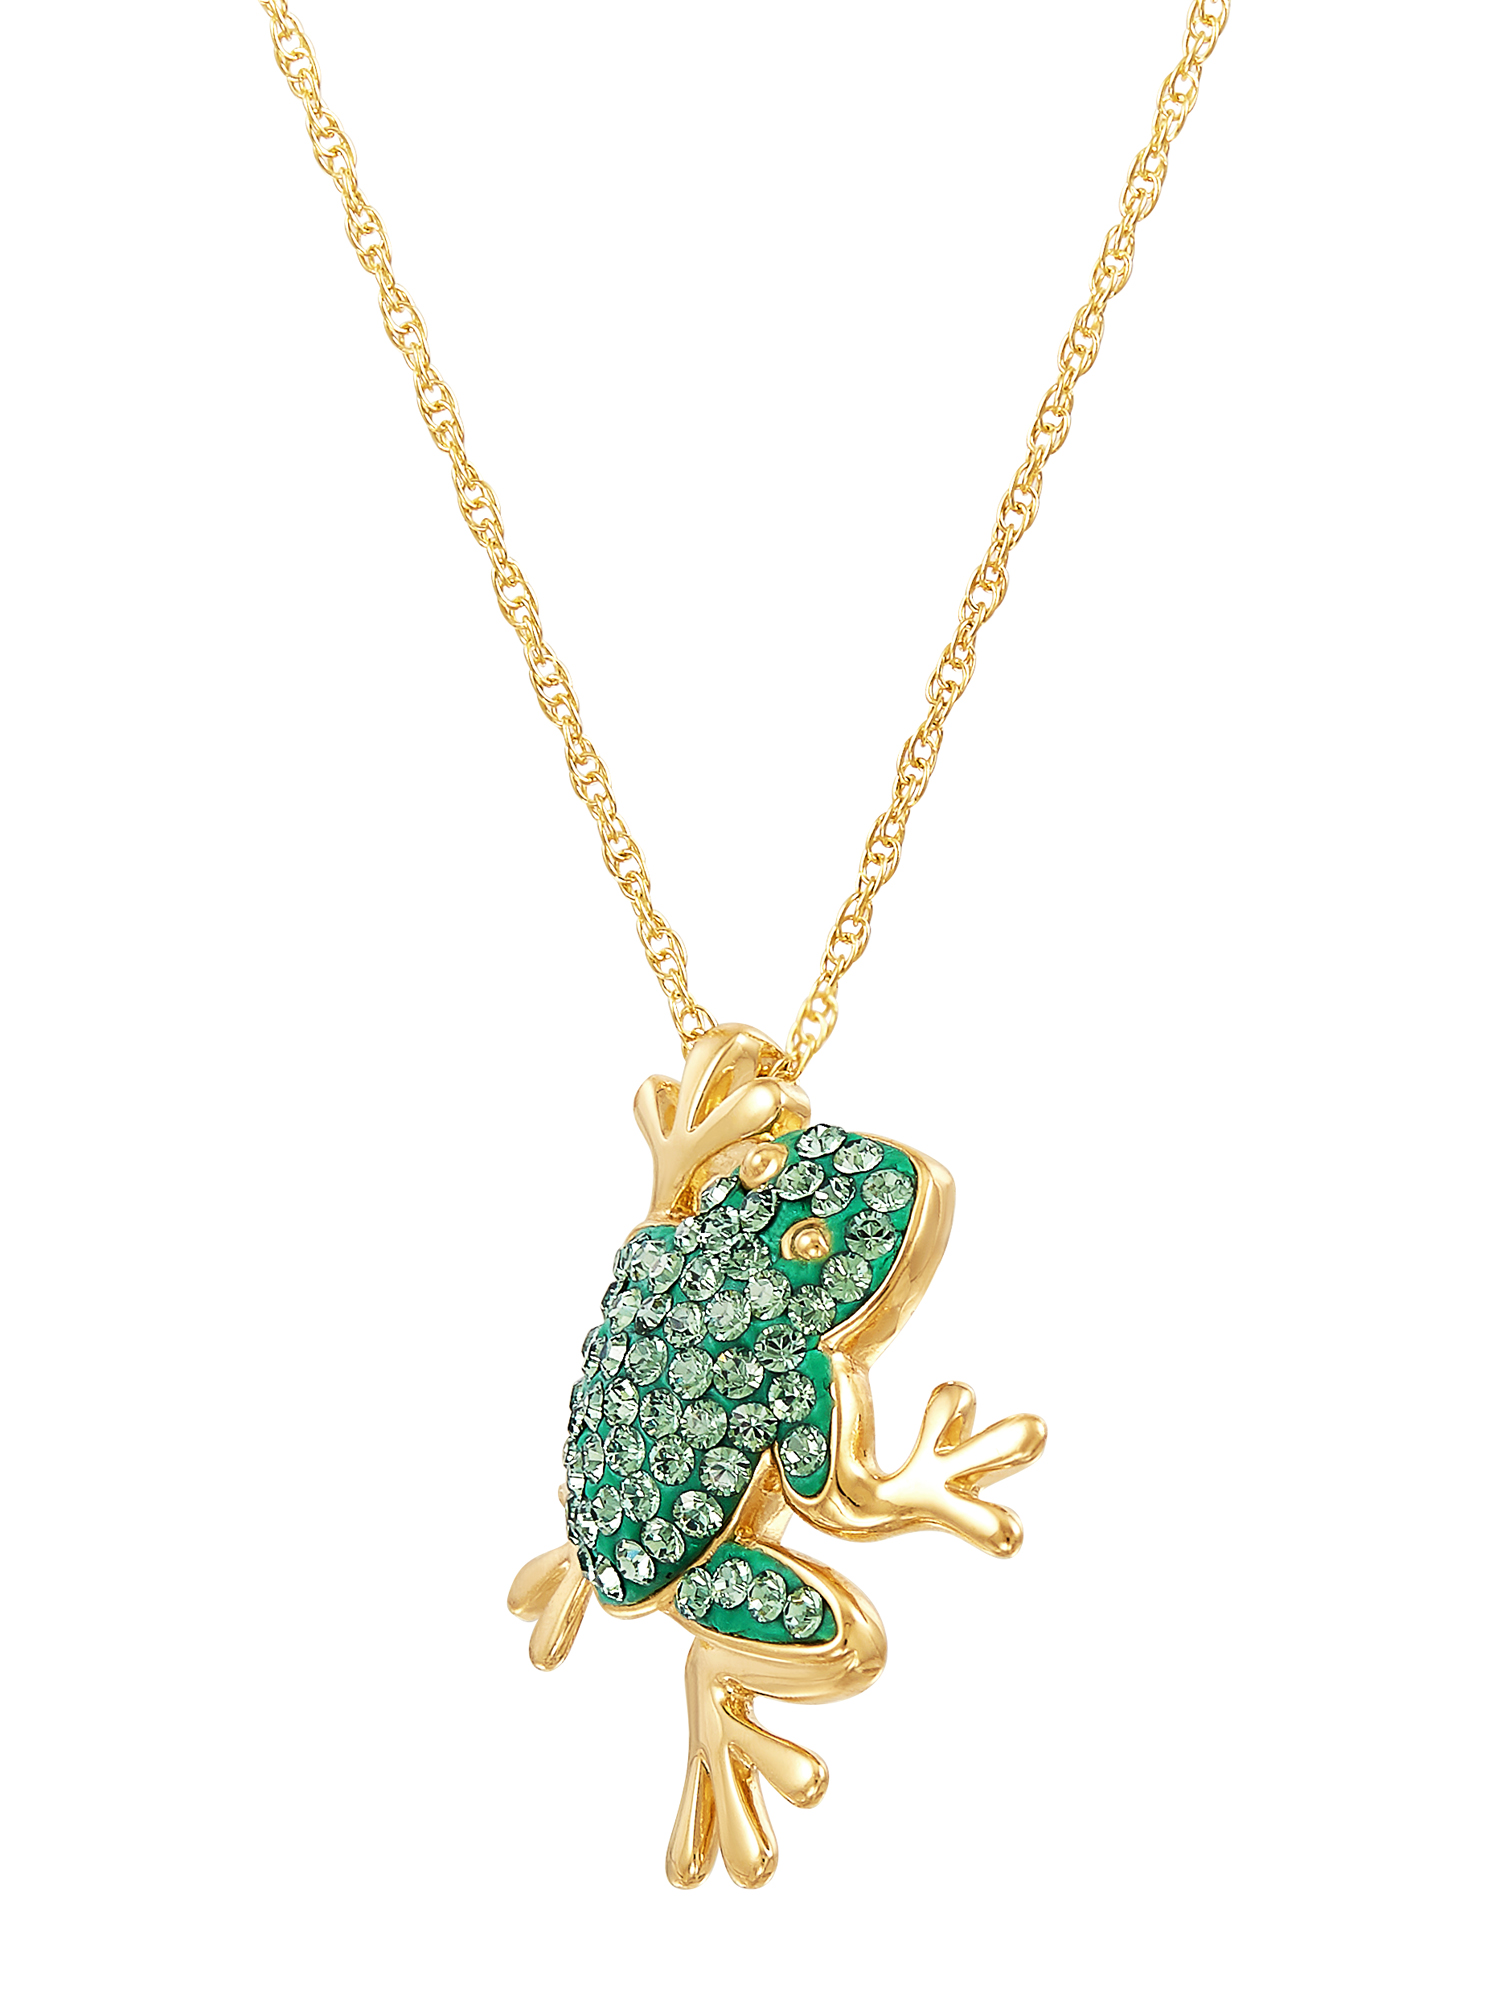 Brilliance Fine Jewelry 18kt Gold over Sterling Silver Frog Pendant made with Crystals, 18" Necklace - image 3 of 4